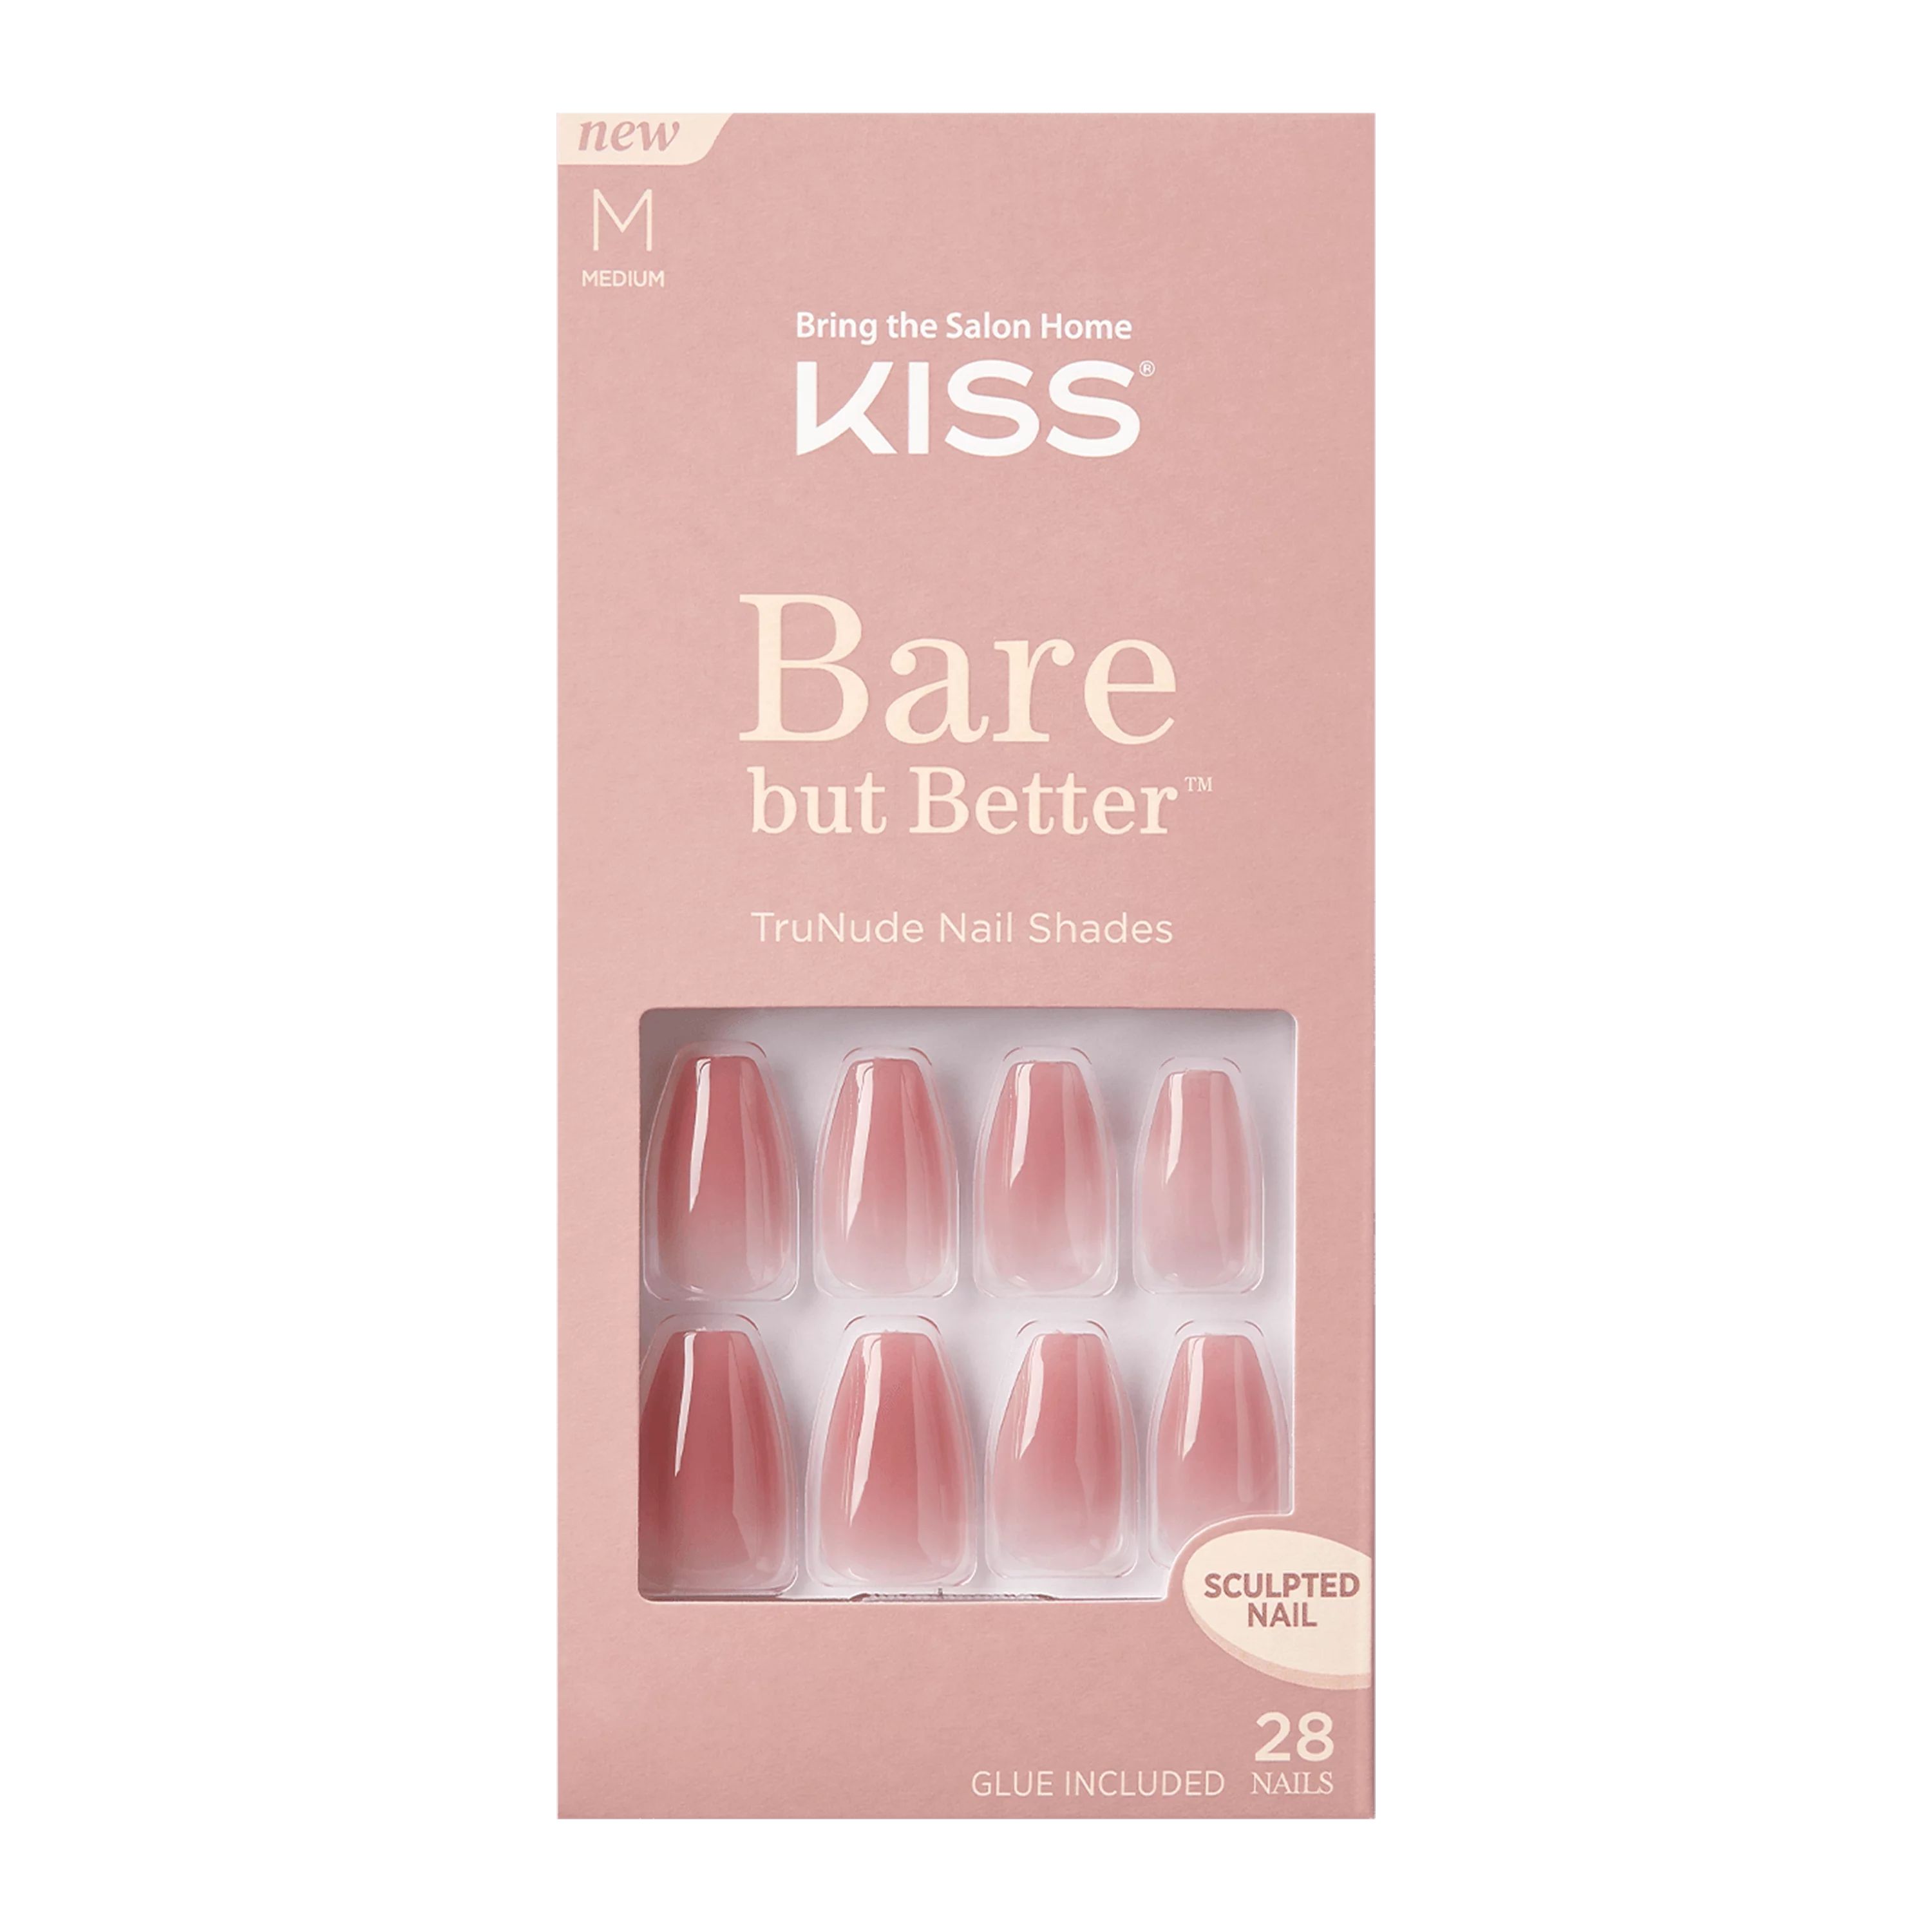 KISS Bare but Better Sculpted Nude Fake Nails, Nude Nude, 28 Count | Walmart (US)